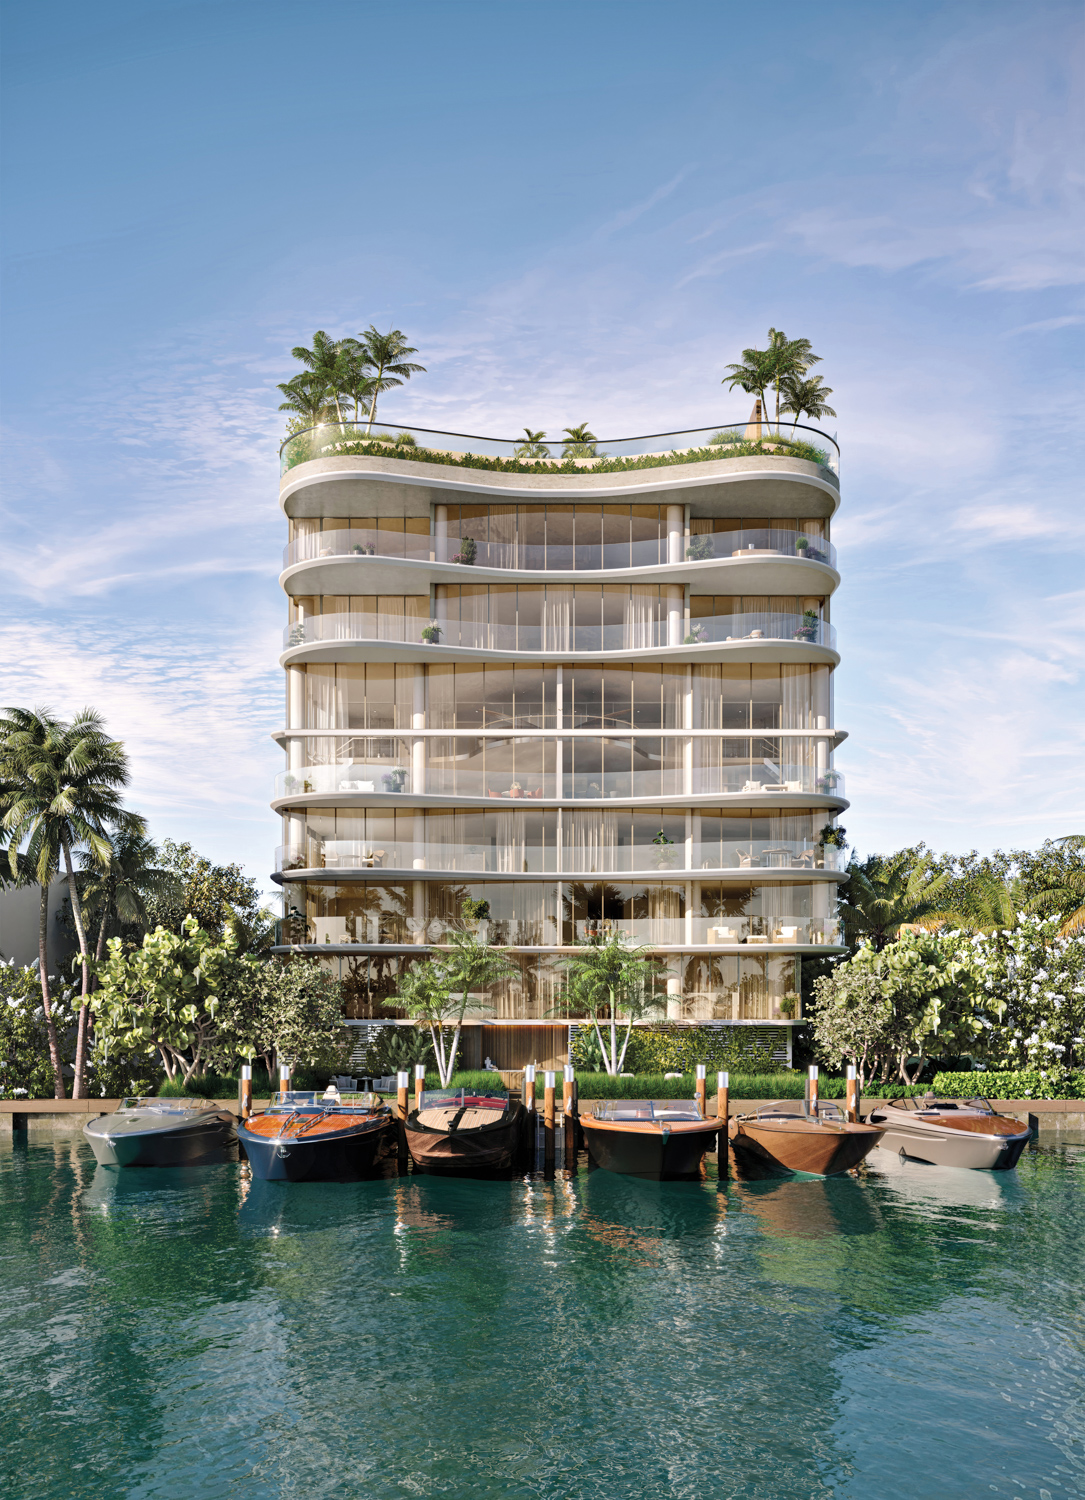 waterfront 8-story condo building with soft curved balconies framed with lush greenery